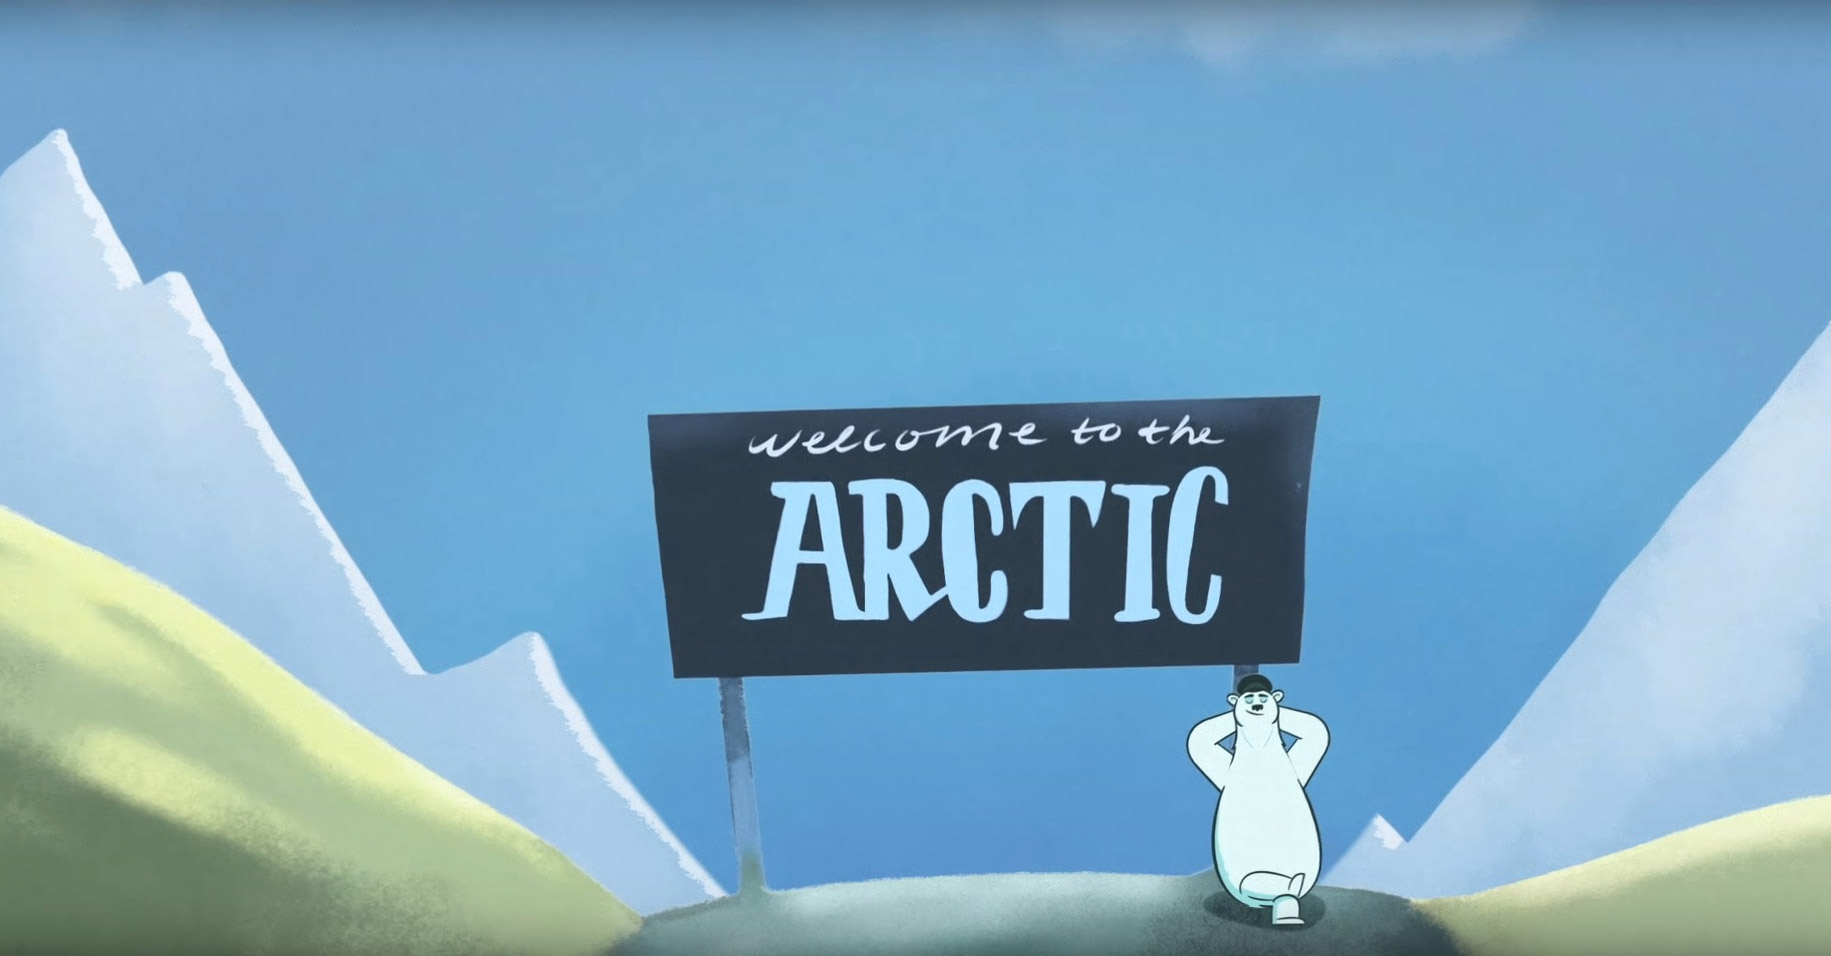 Welcome to the arctic - Arctic travel